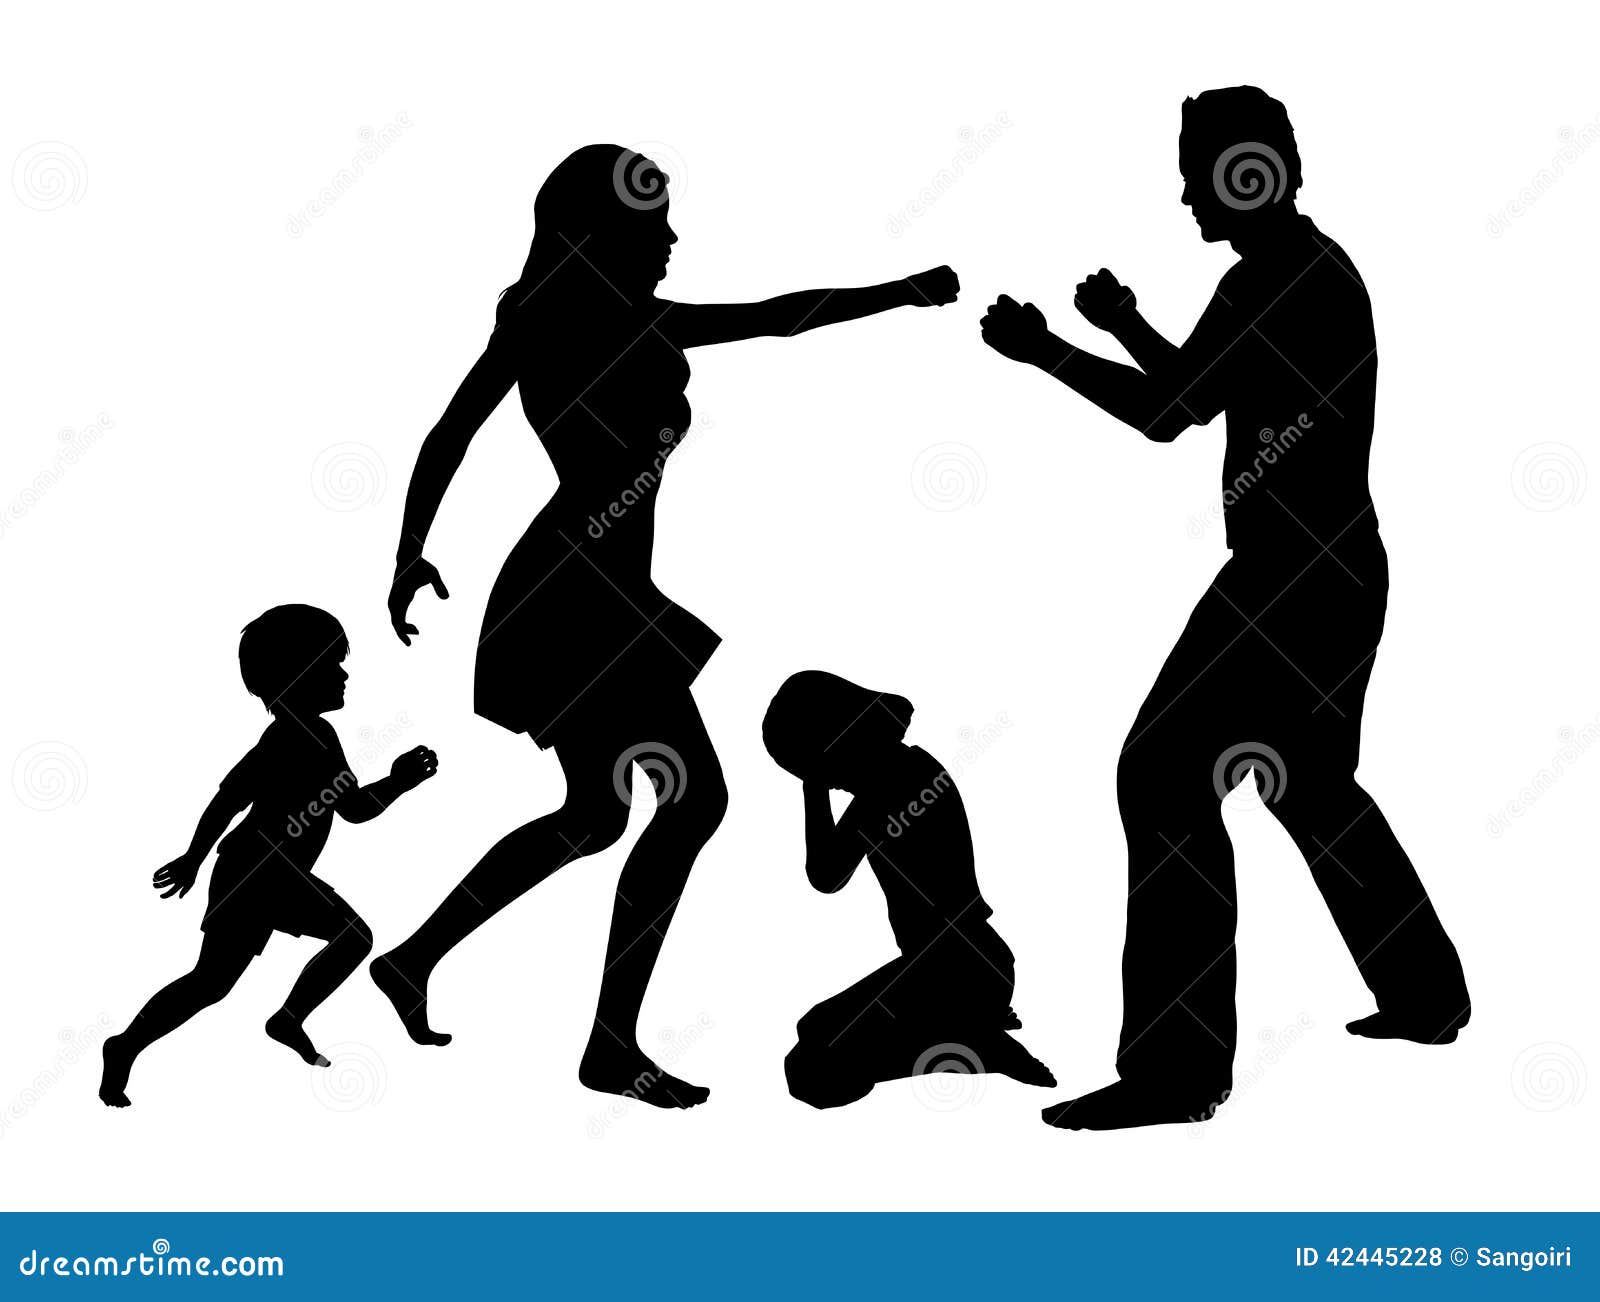 family violence clipart - photo #3